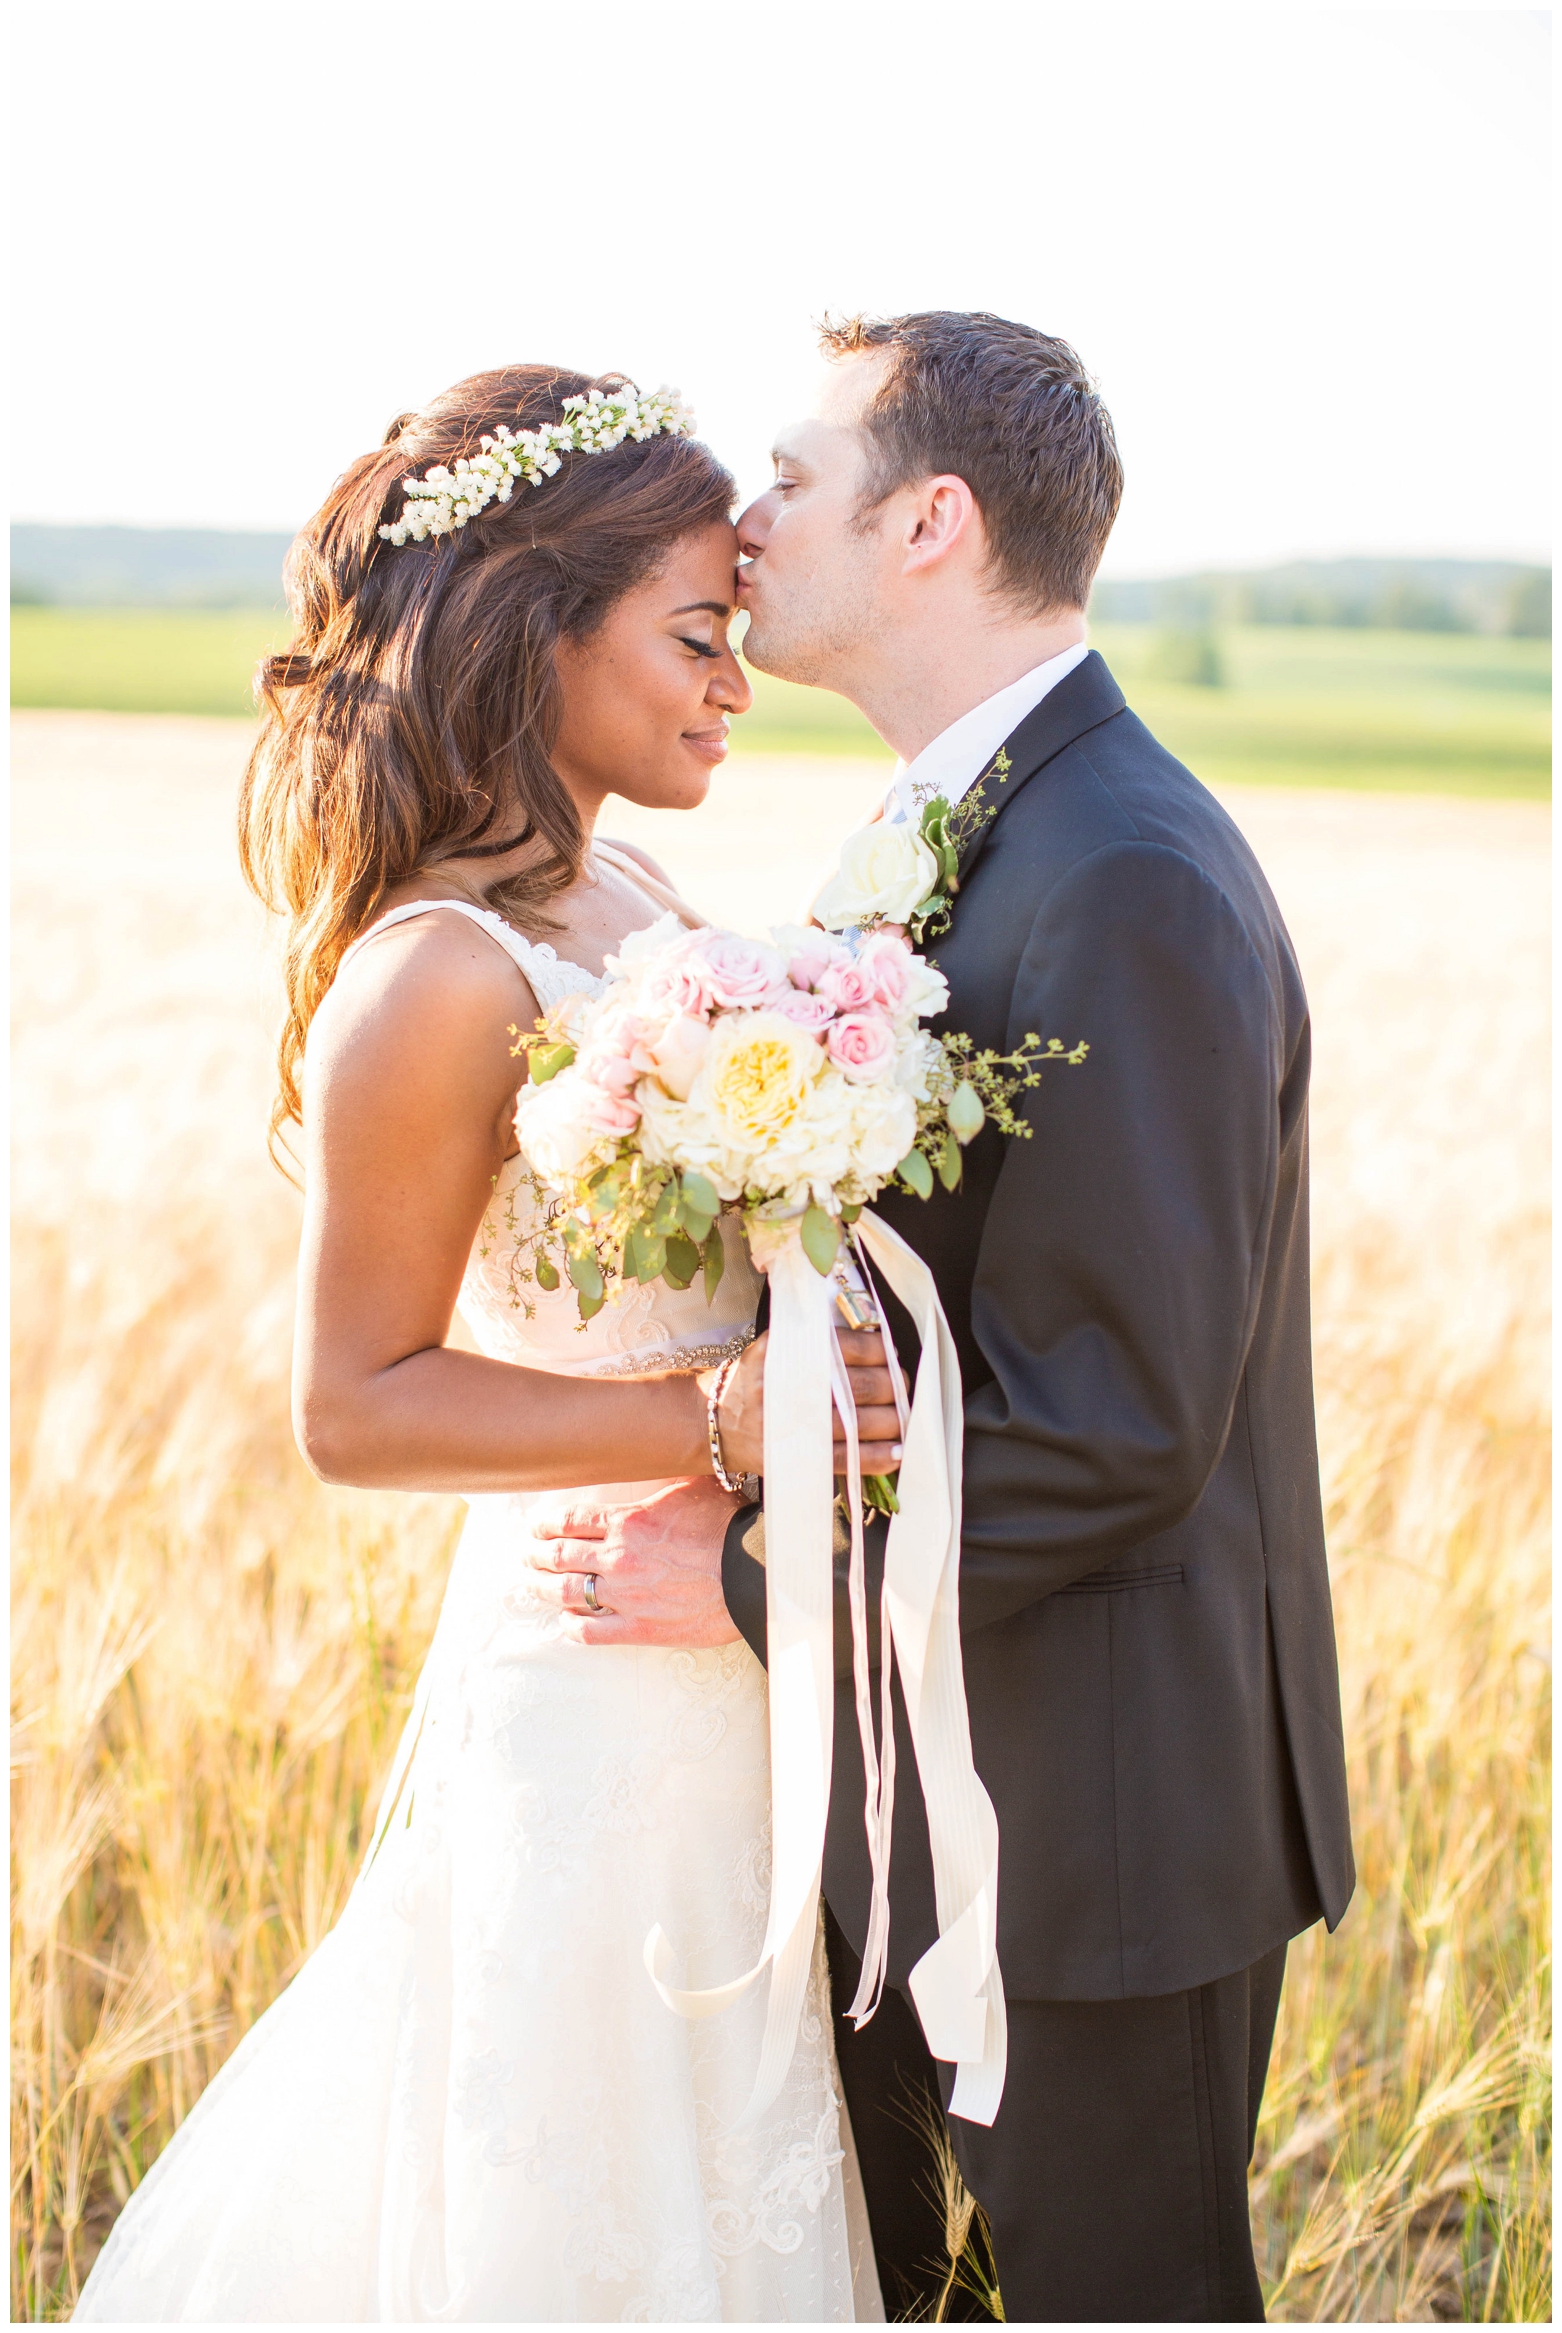 View More: http://hopetaylorphotographyphotos.pass.us/cristal-and-michael